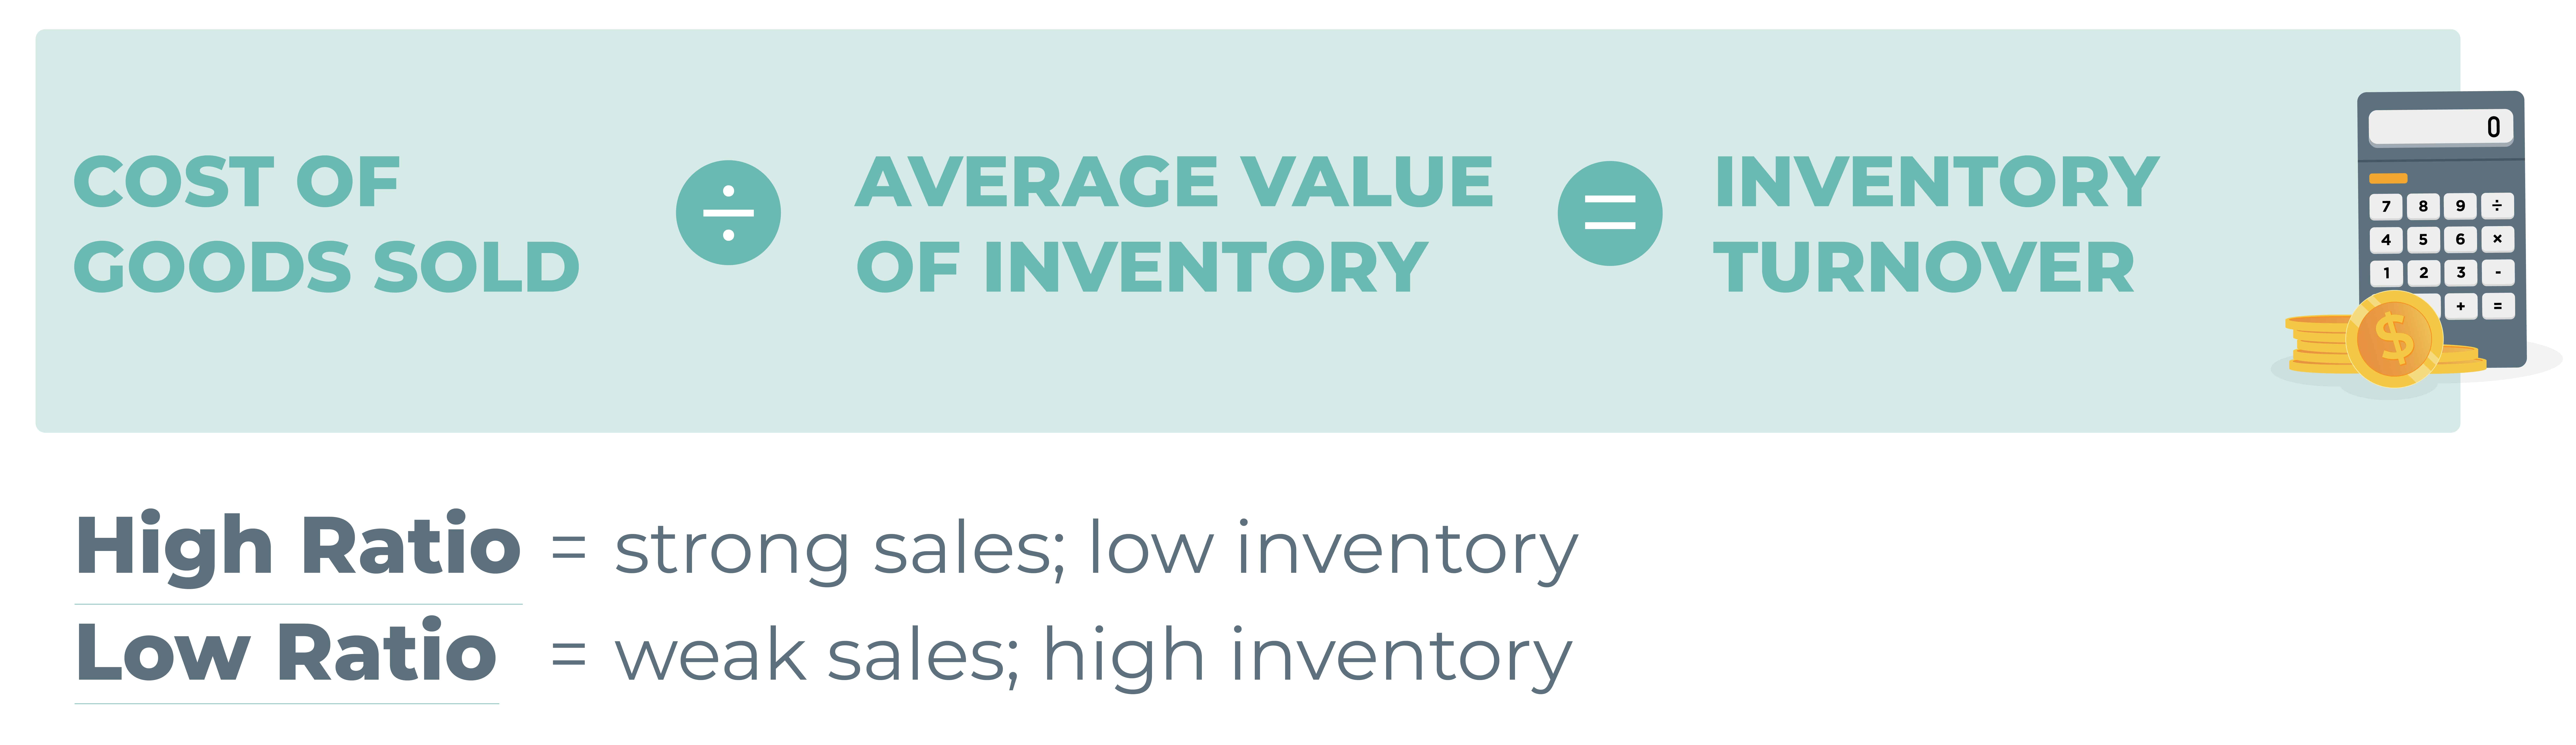 Inventory turnover (costs of goods sold / average value of inventory)